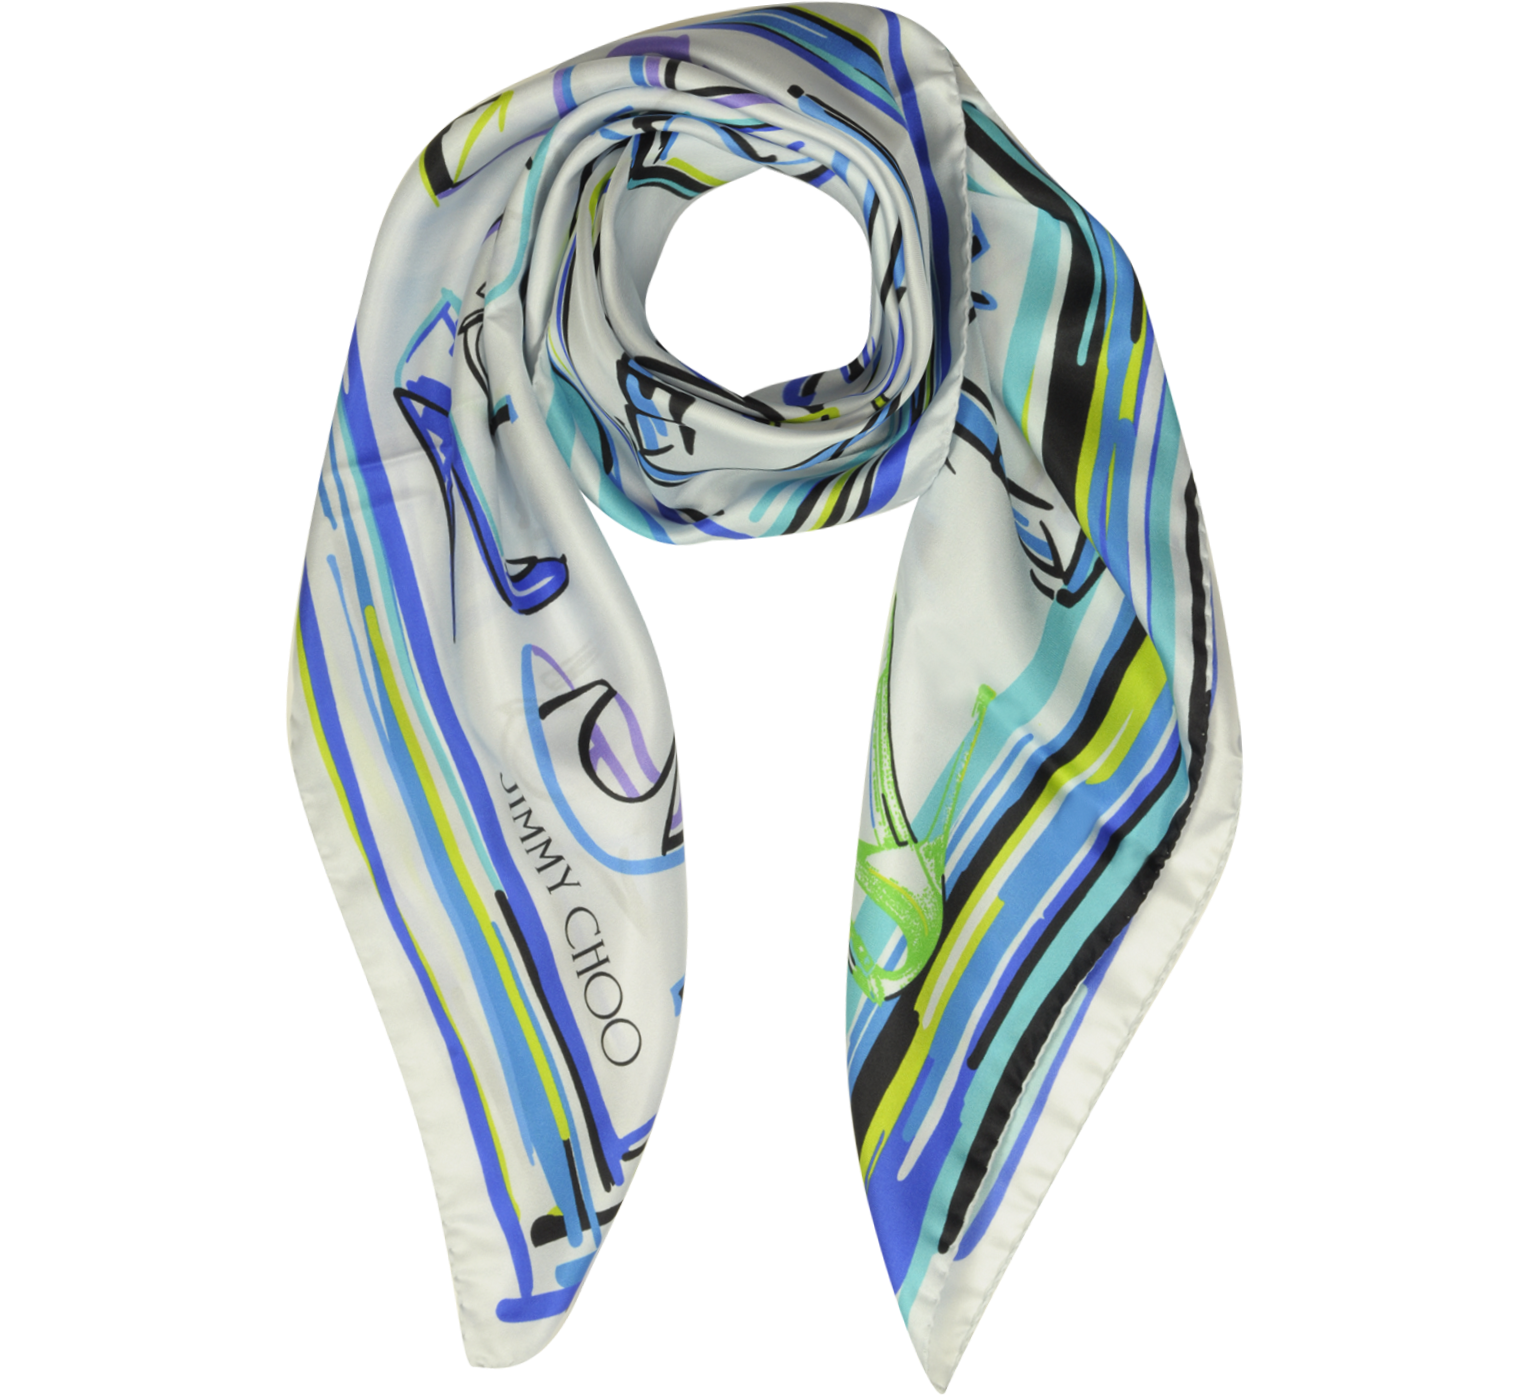 Jimmy Choo Petrol Mix Shoes Printed Twill Silk Square Scarf at FORZIERI